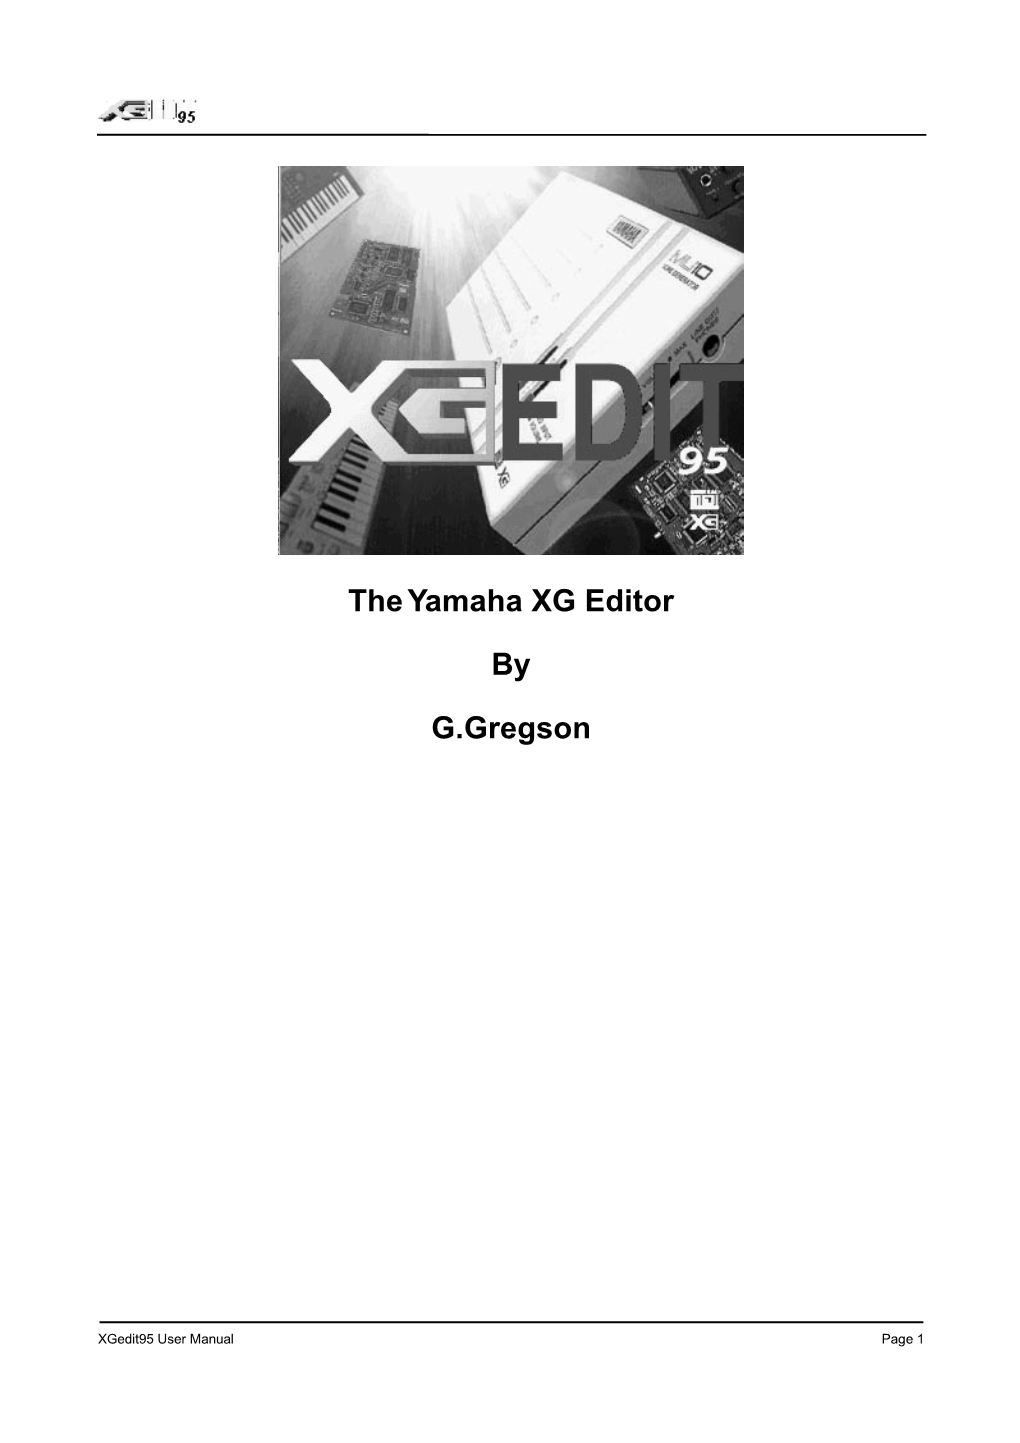 Xgedit95 User Manual Page 1 Contents